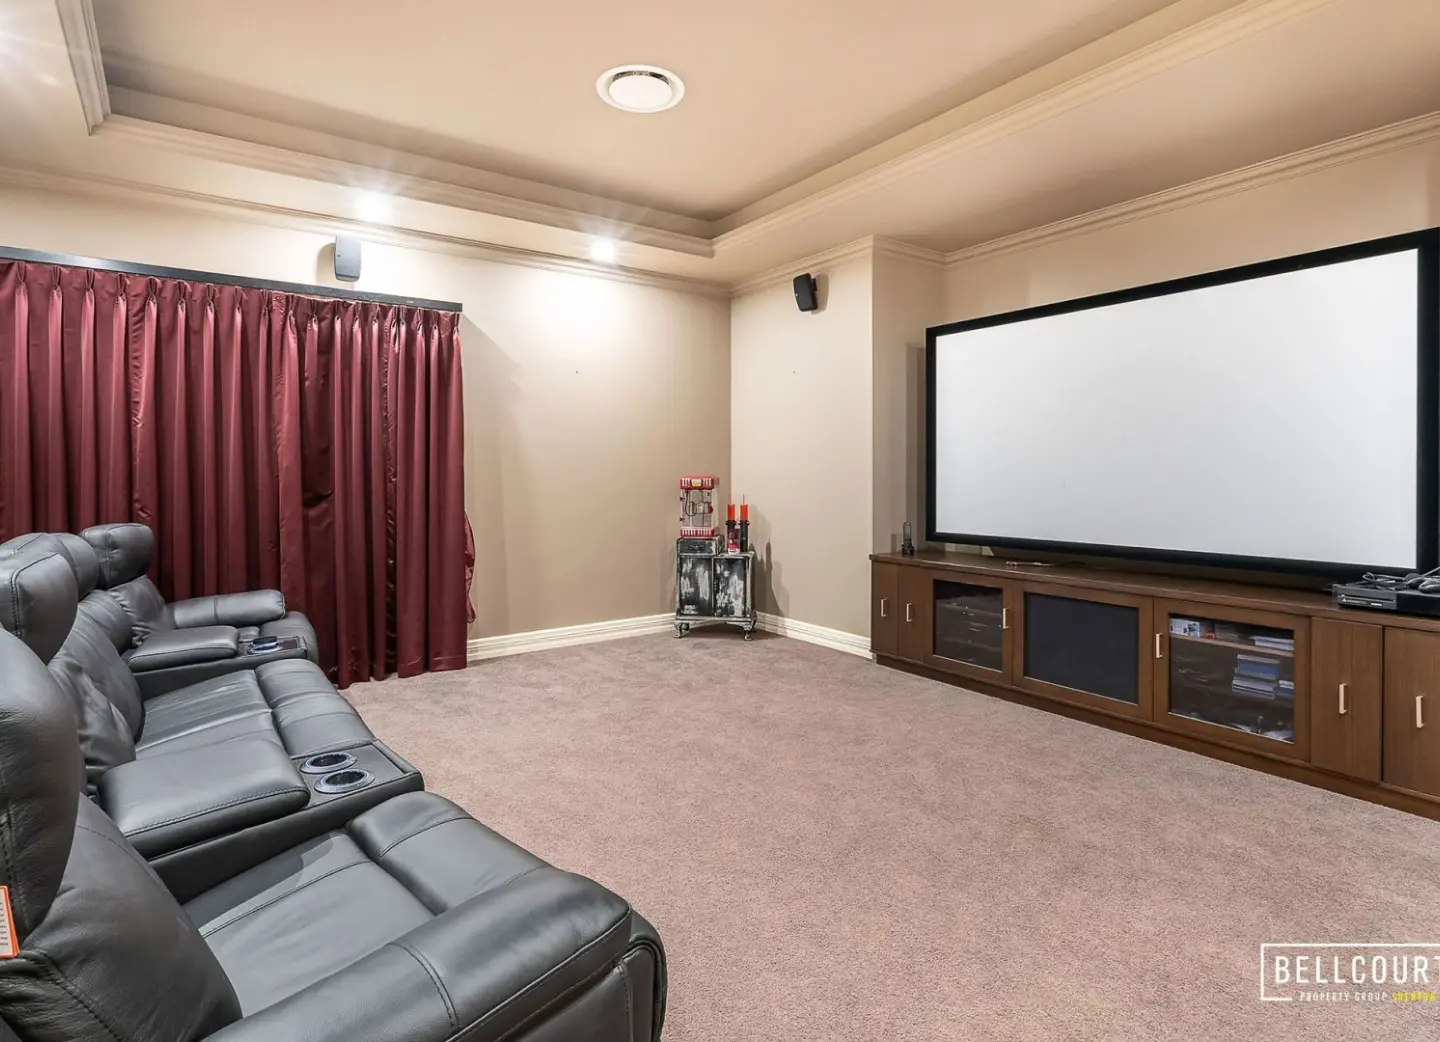 Home movie room with theater sofa